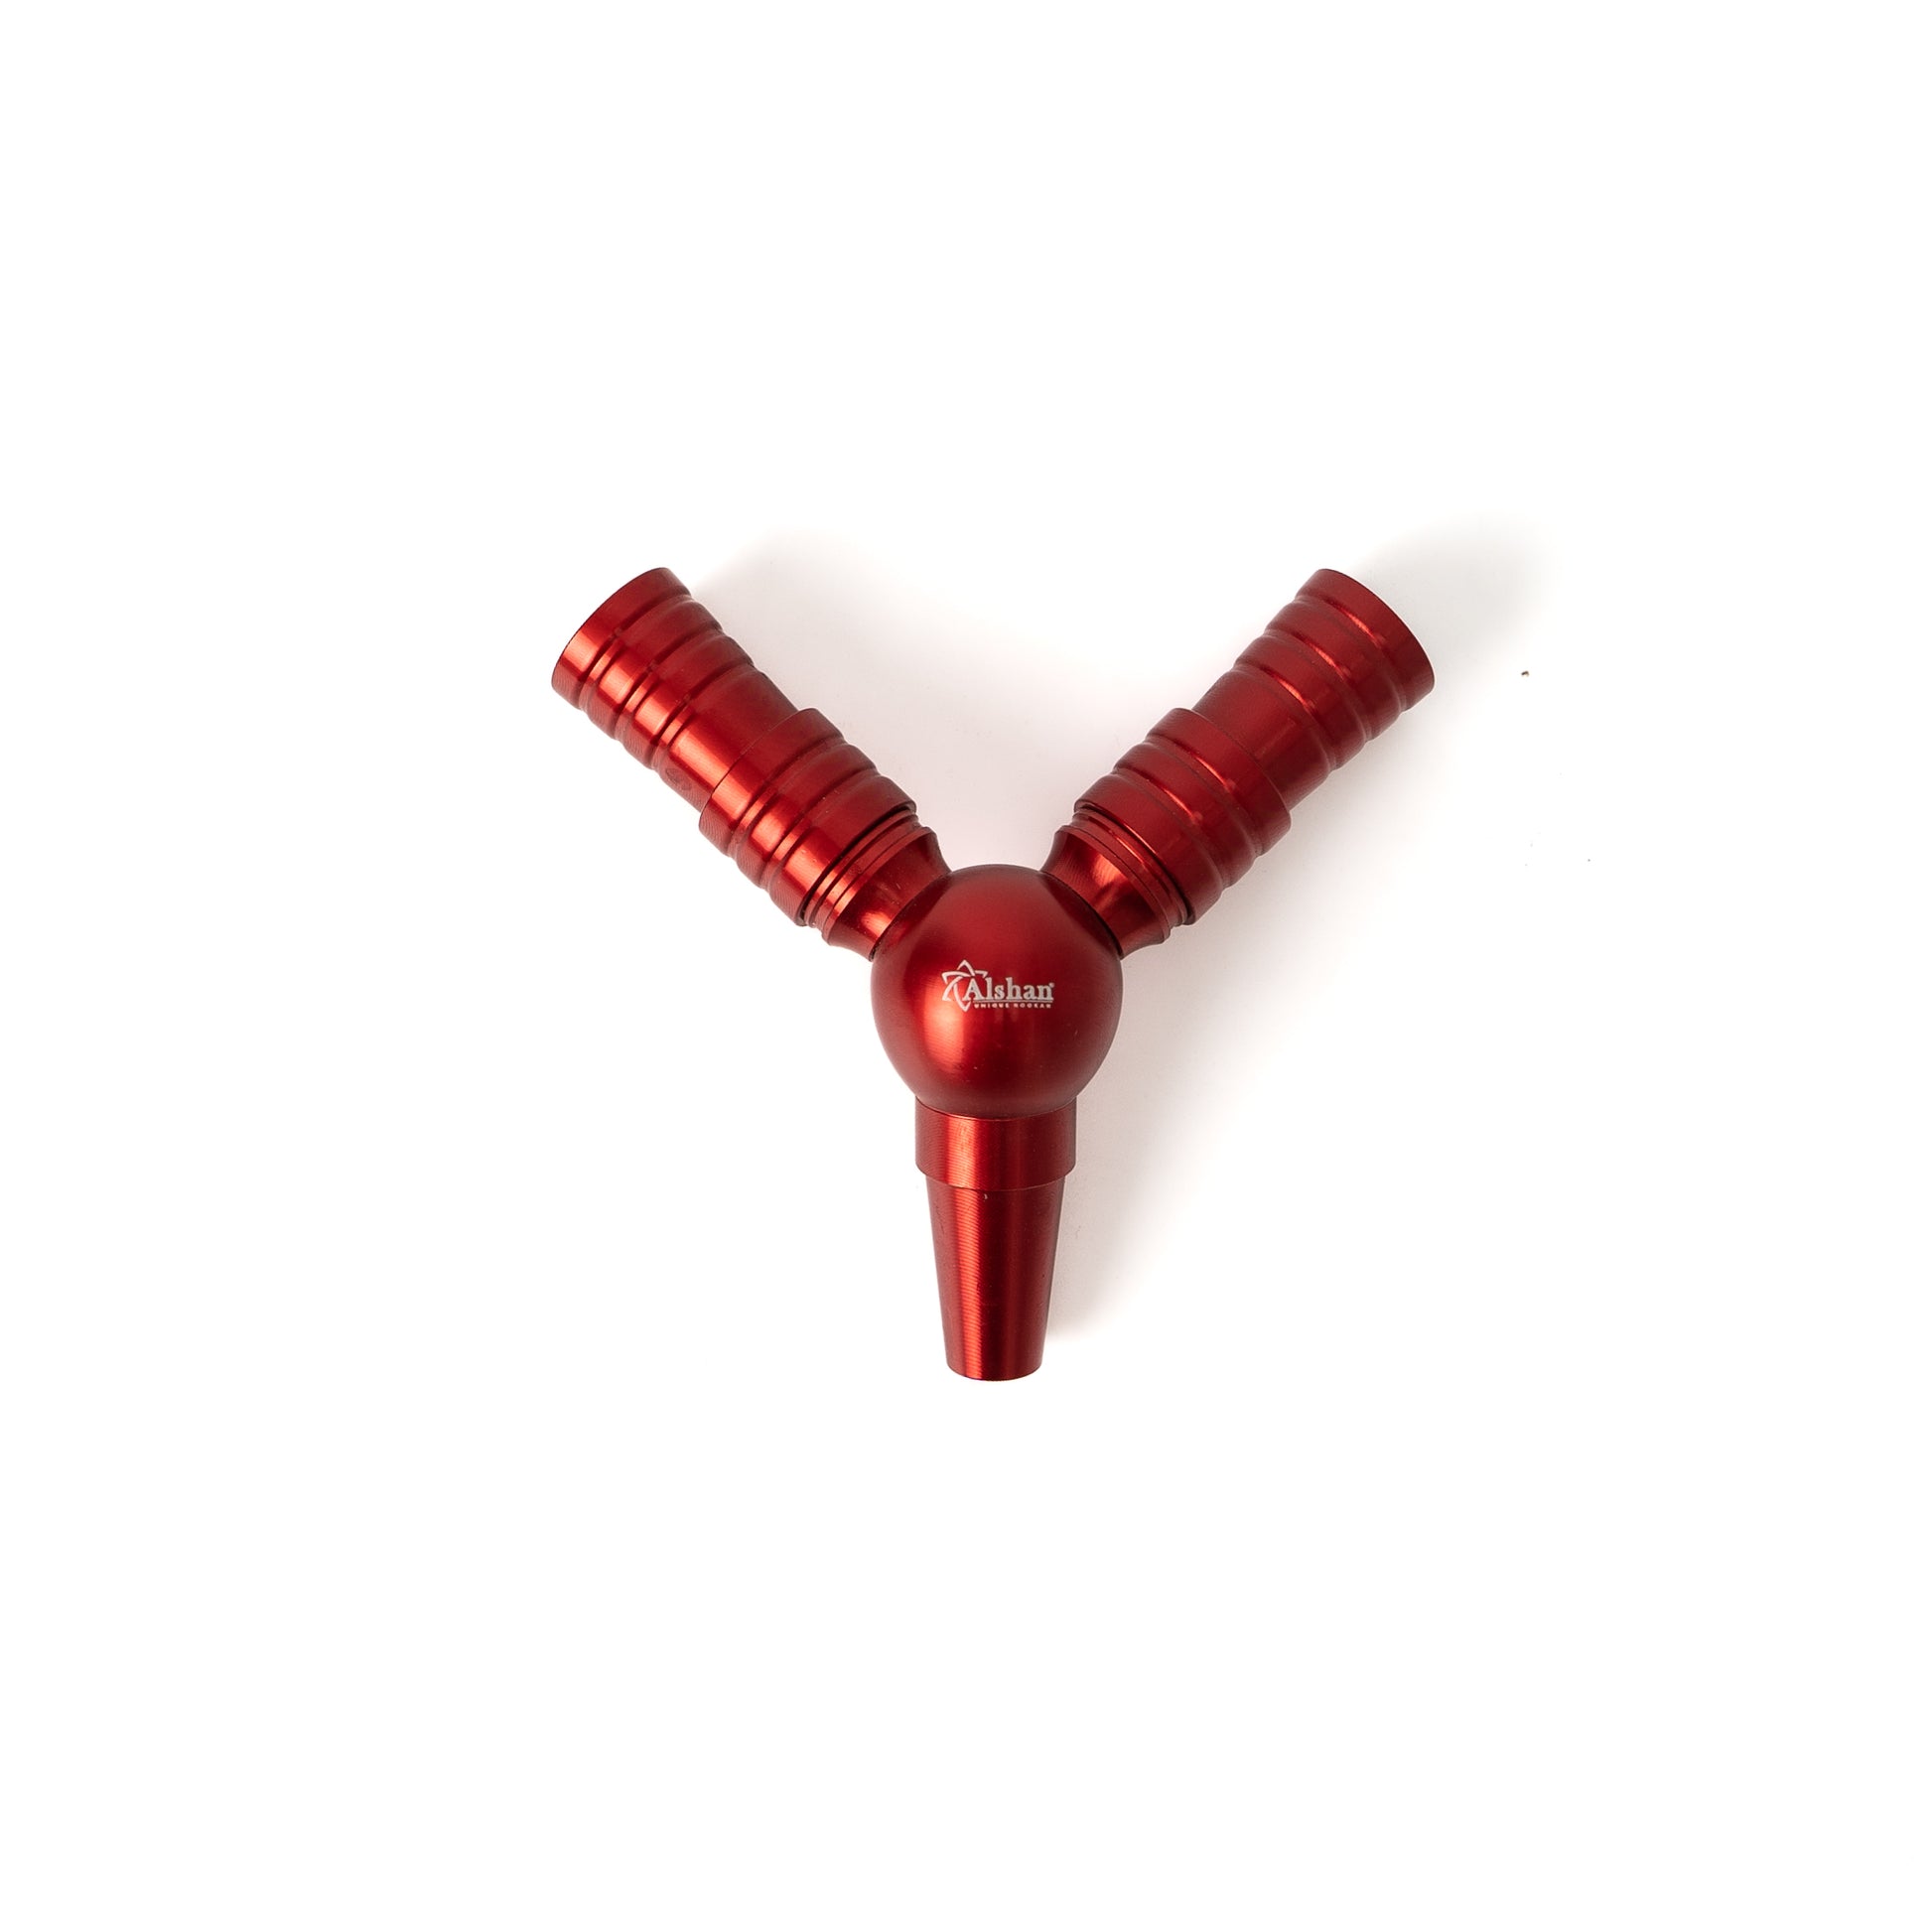 Dual Pipe Extension (Connector) for Hookah Pipe - Red